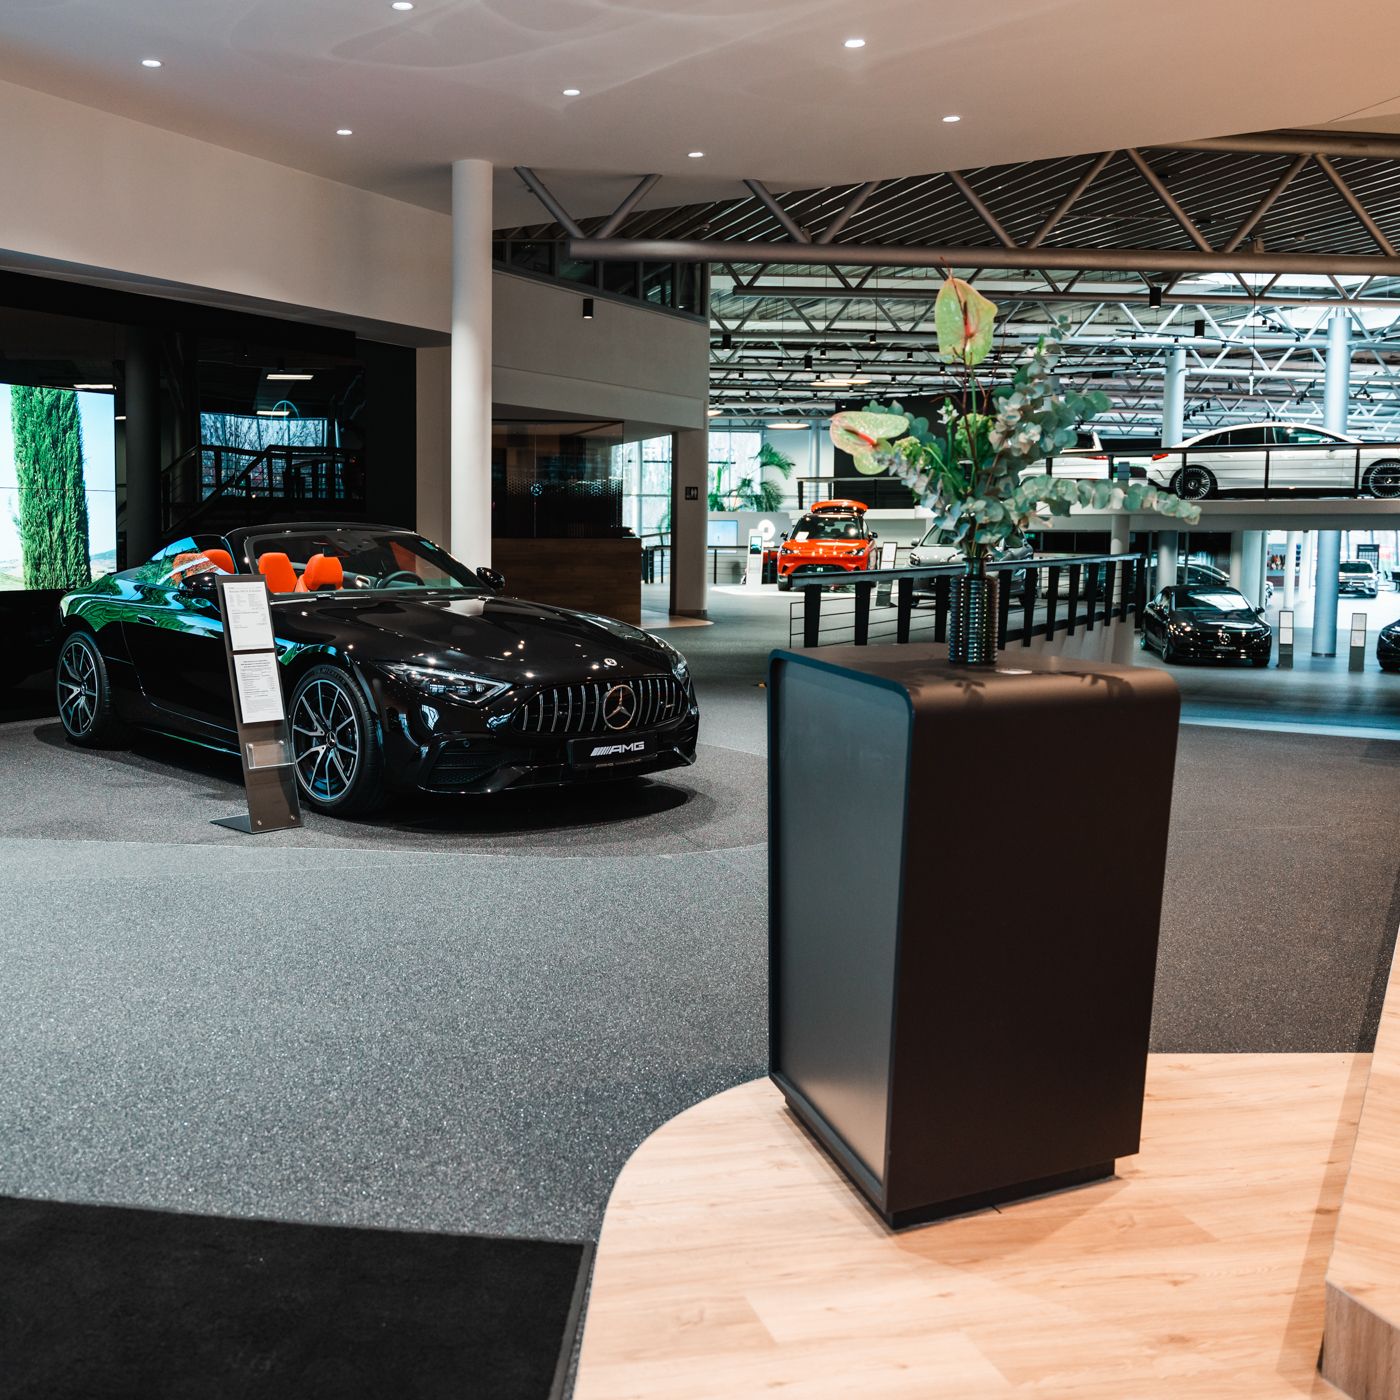 STERNAUTO Group reveals the new AMG Performance Center in Dresden.